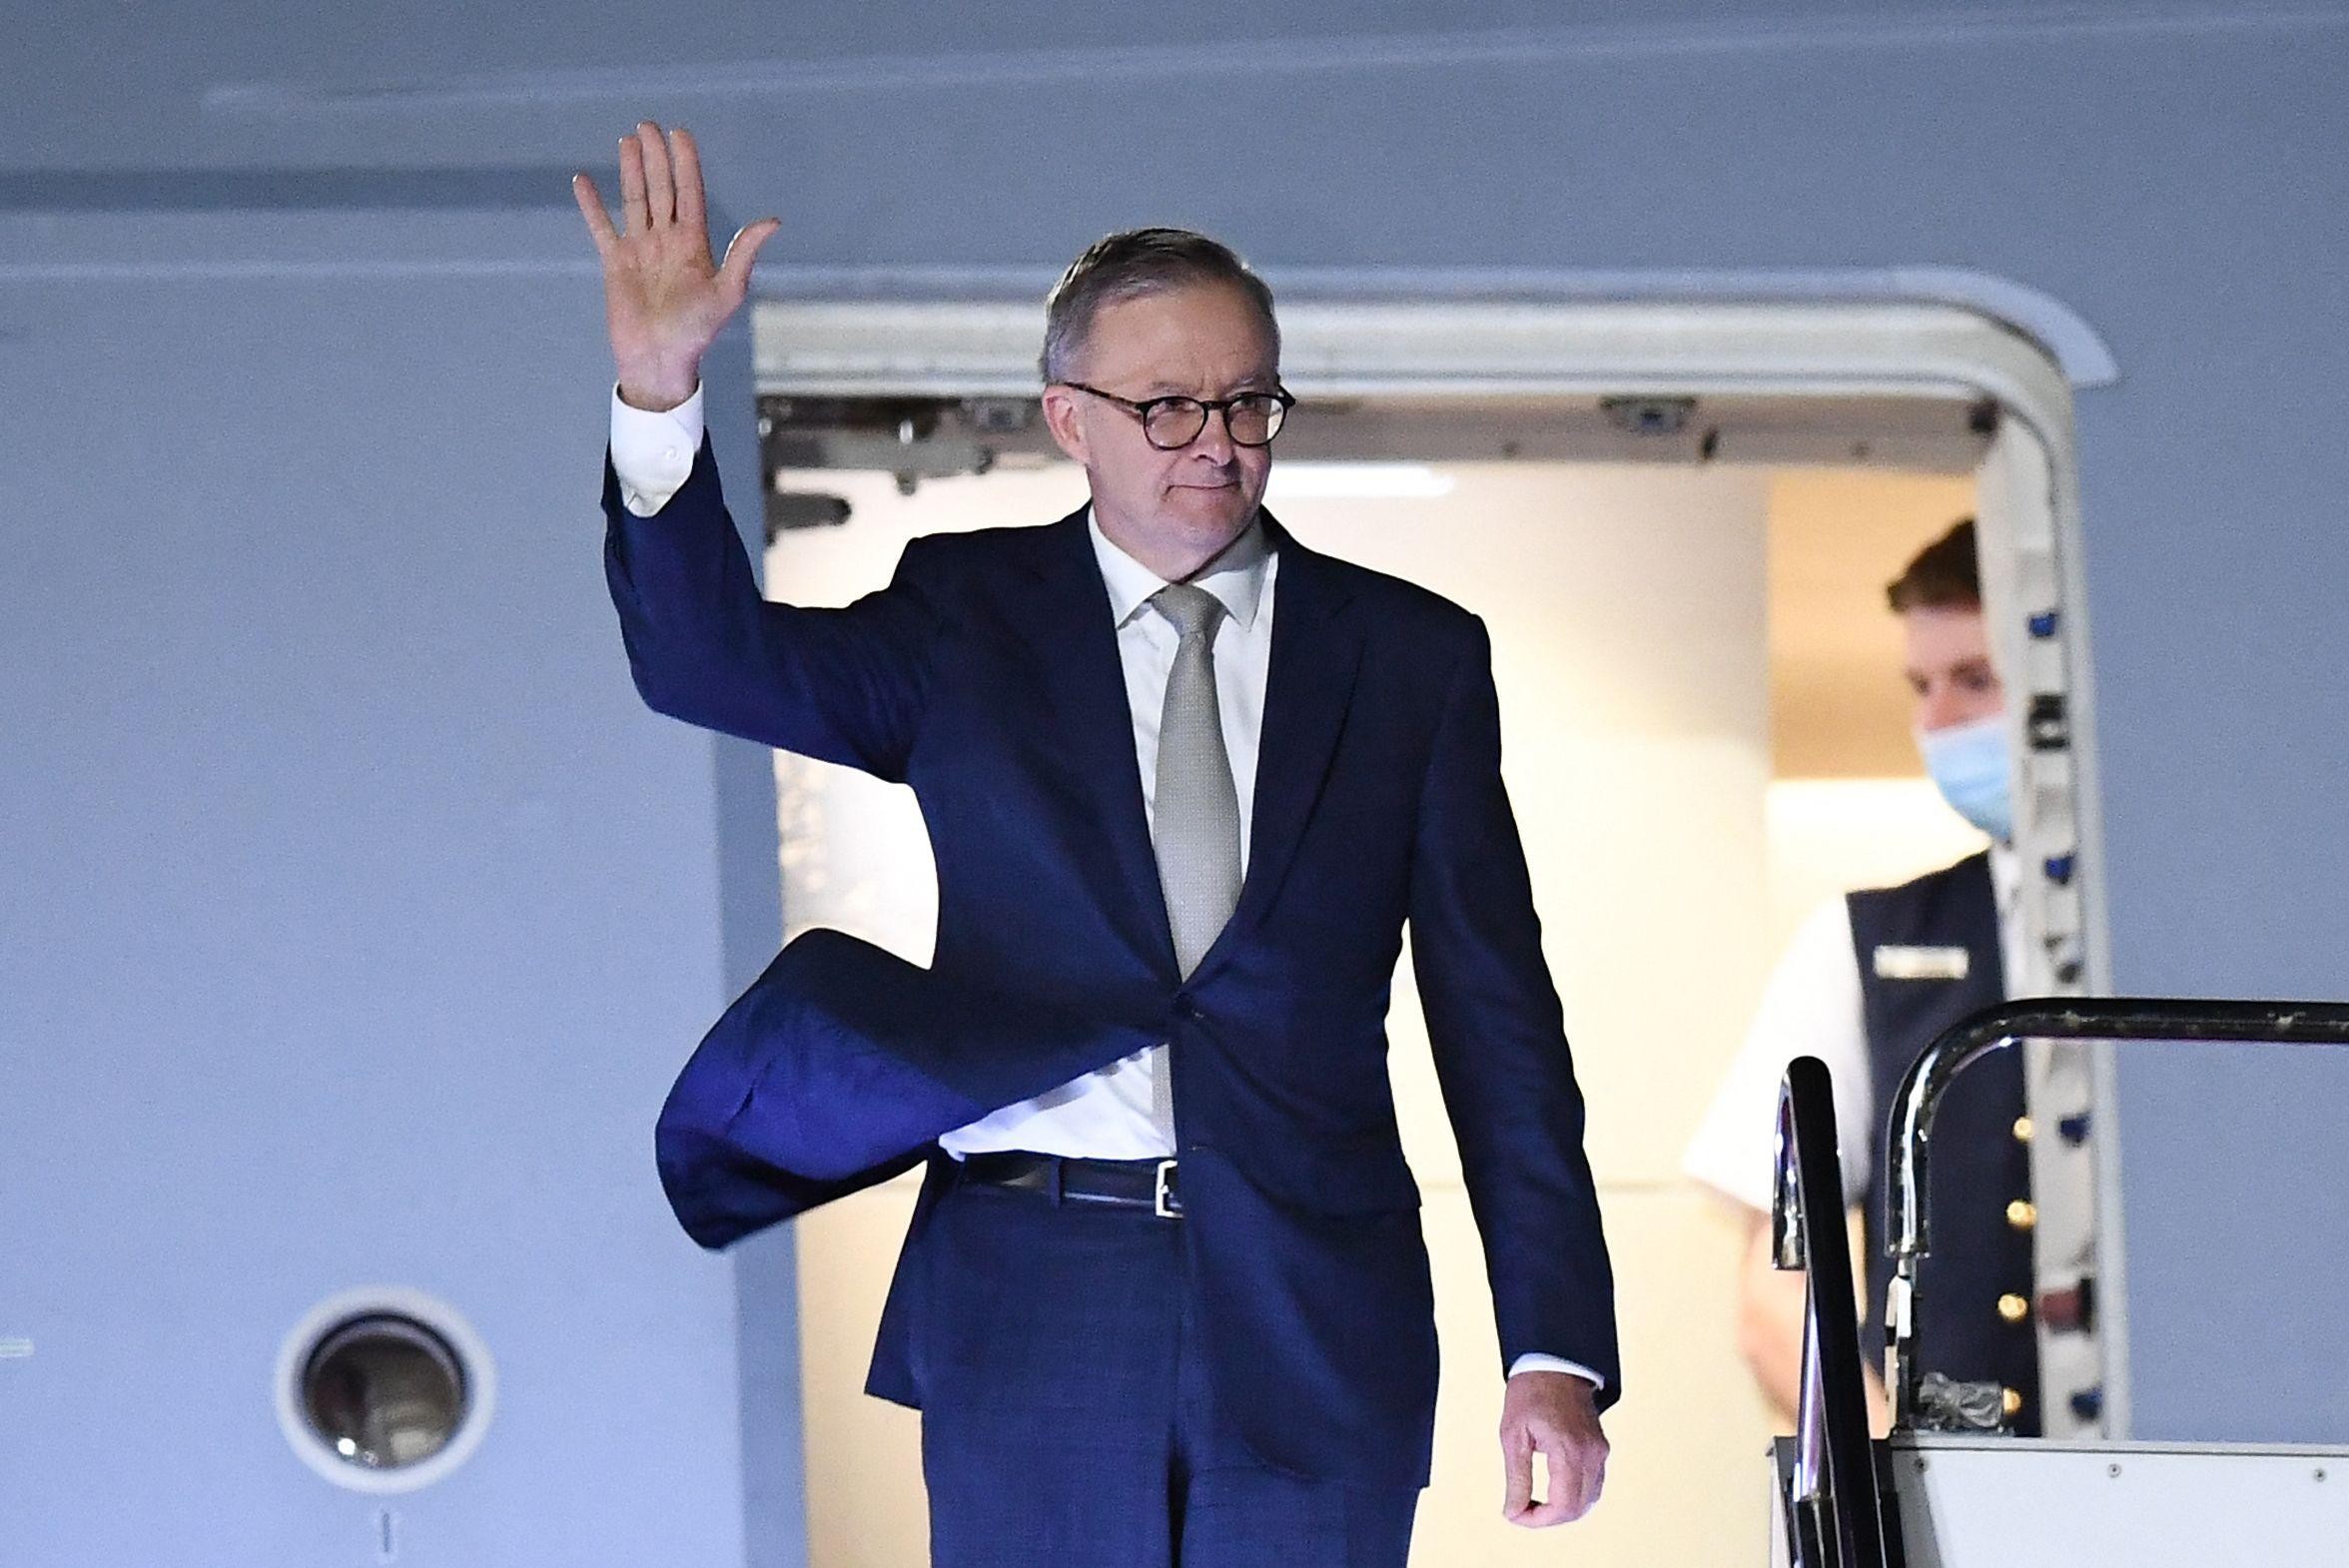 Raised in Poverty, Now Most Powerful Man Down Under: Who Is Anthony Albanese, Australia’s New Prime Minister?